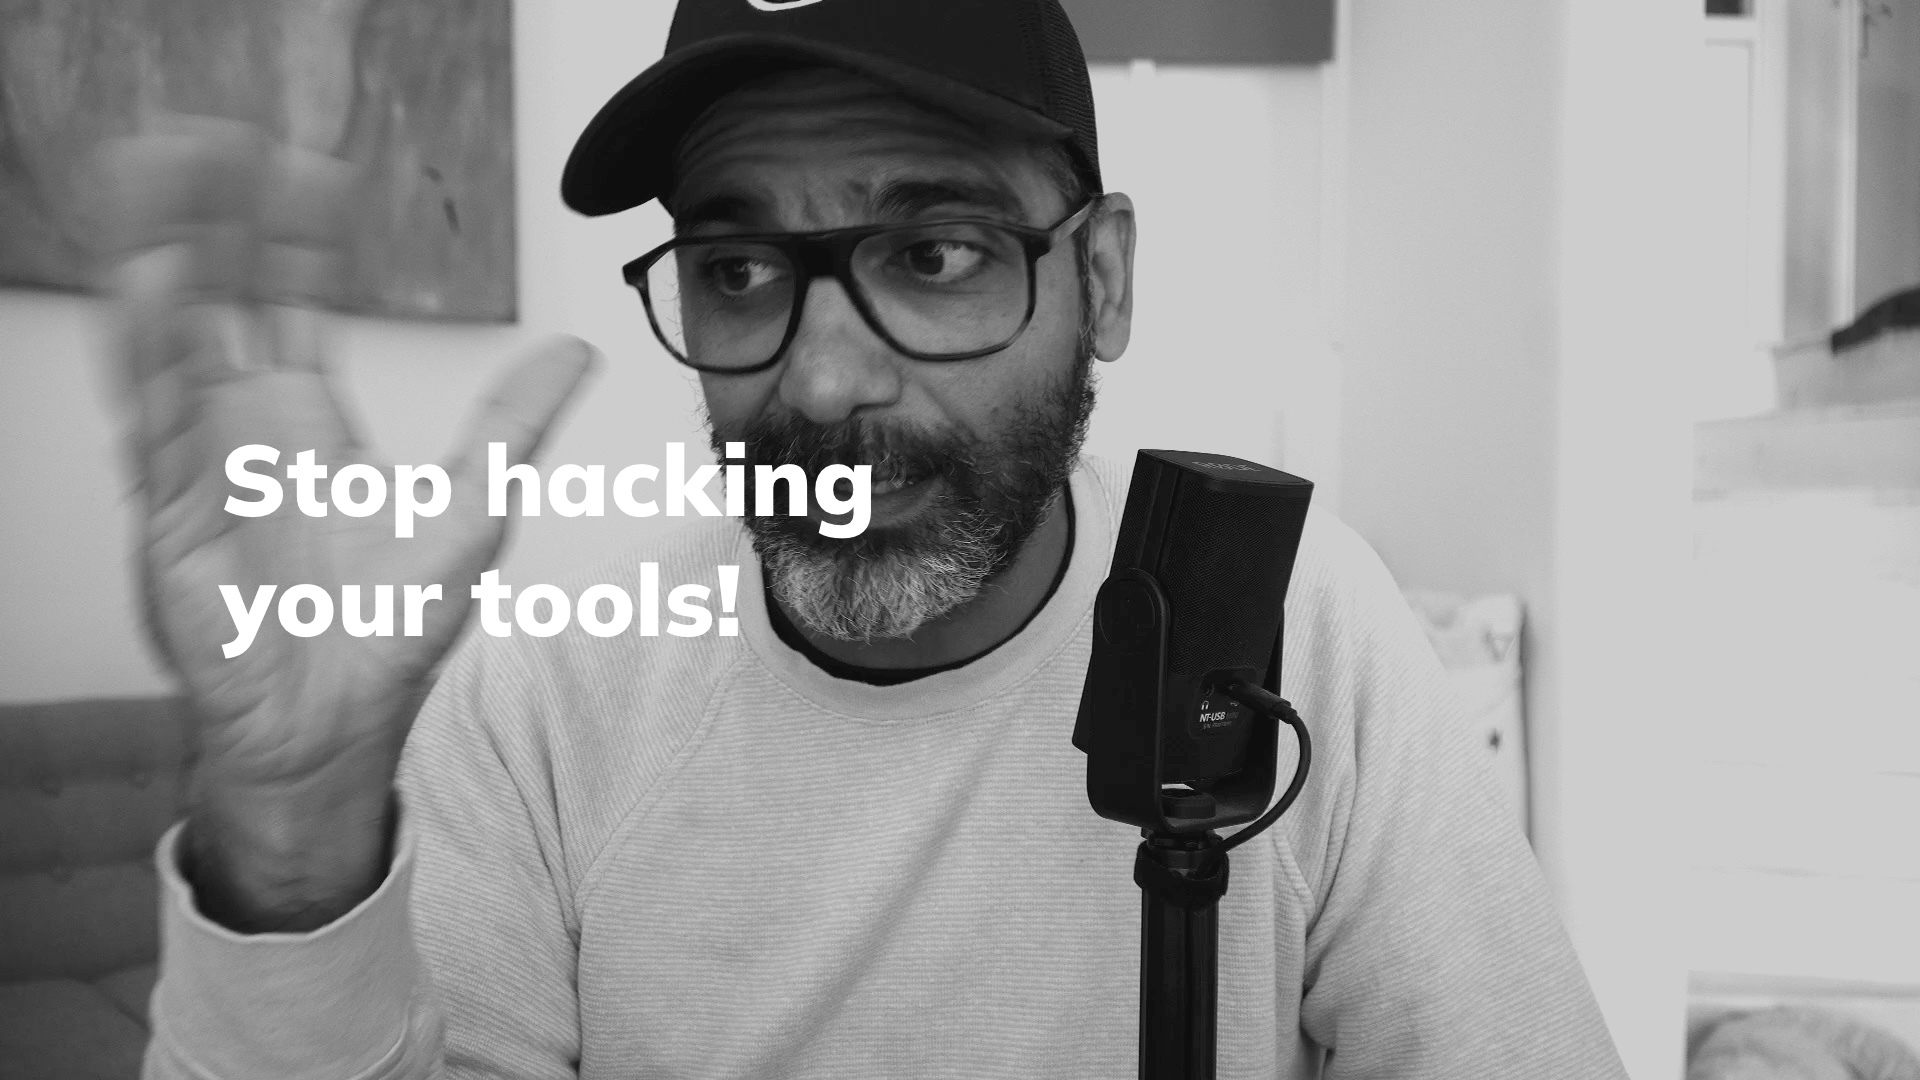 Stop hacking your tools!